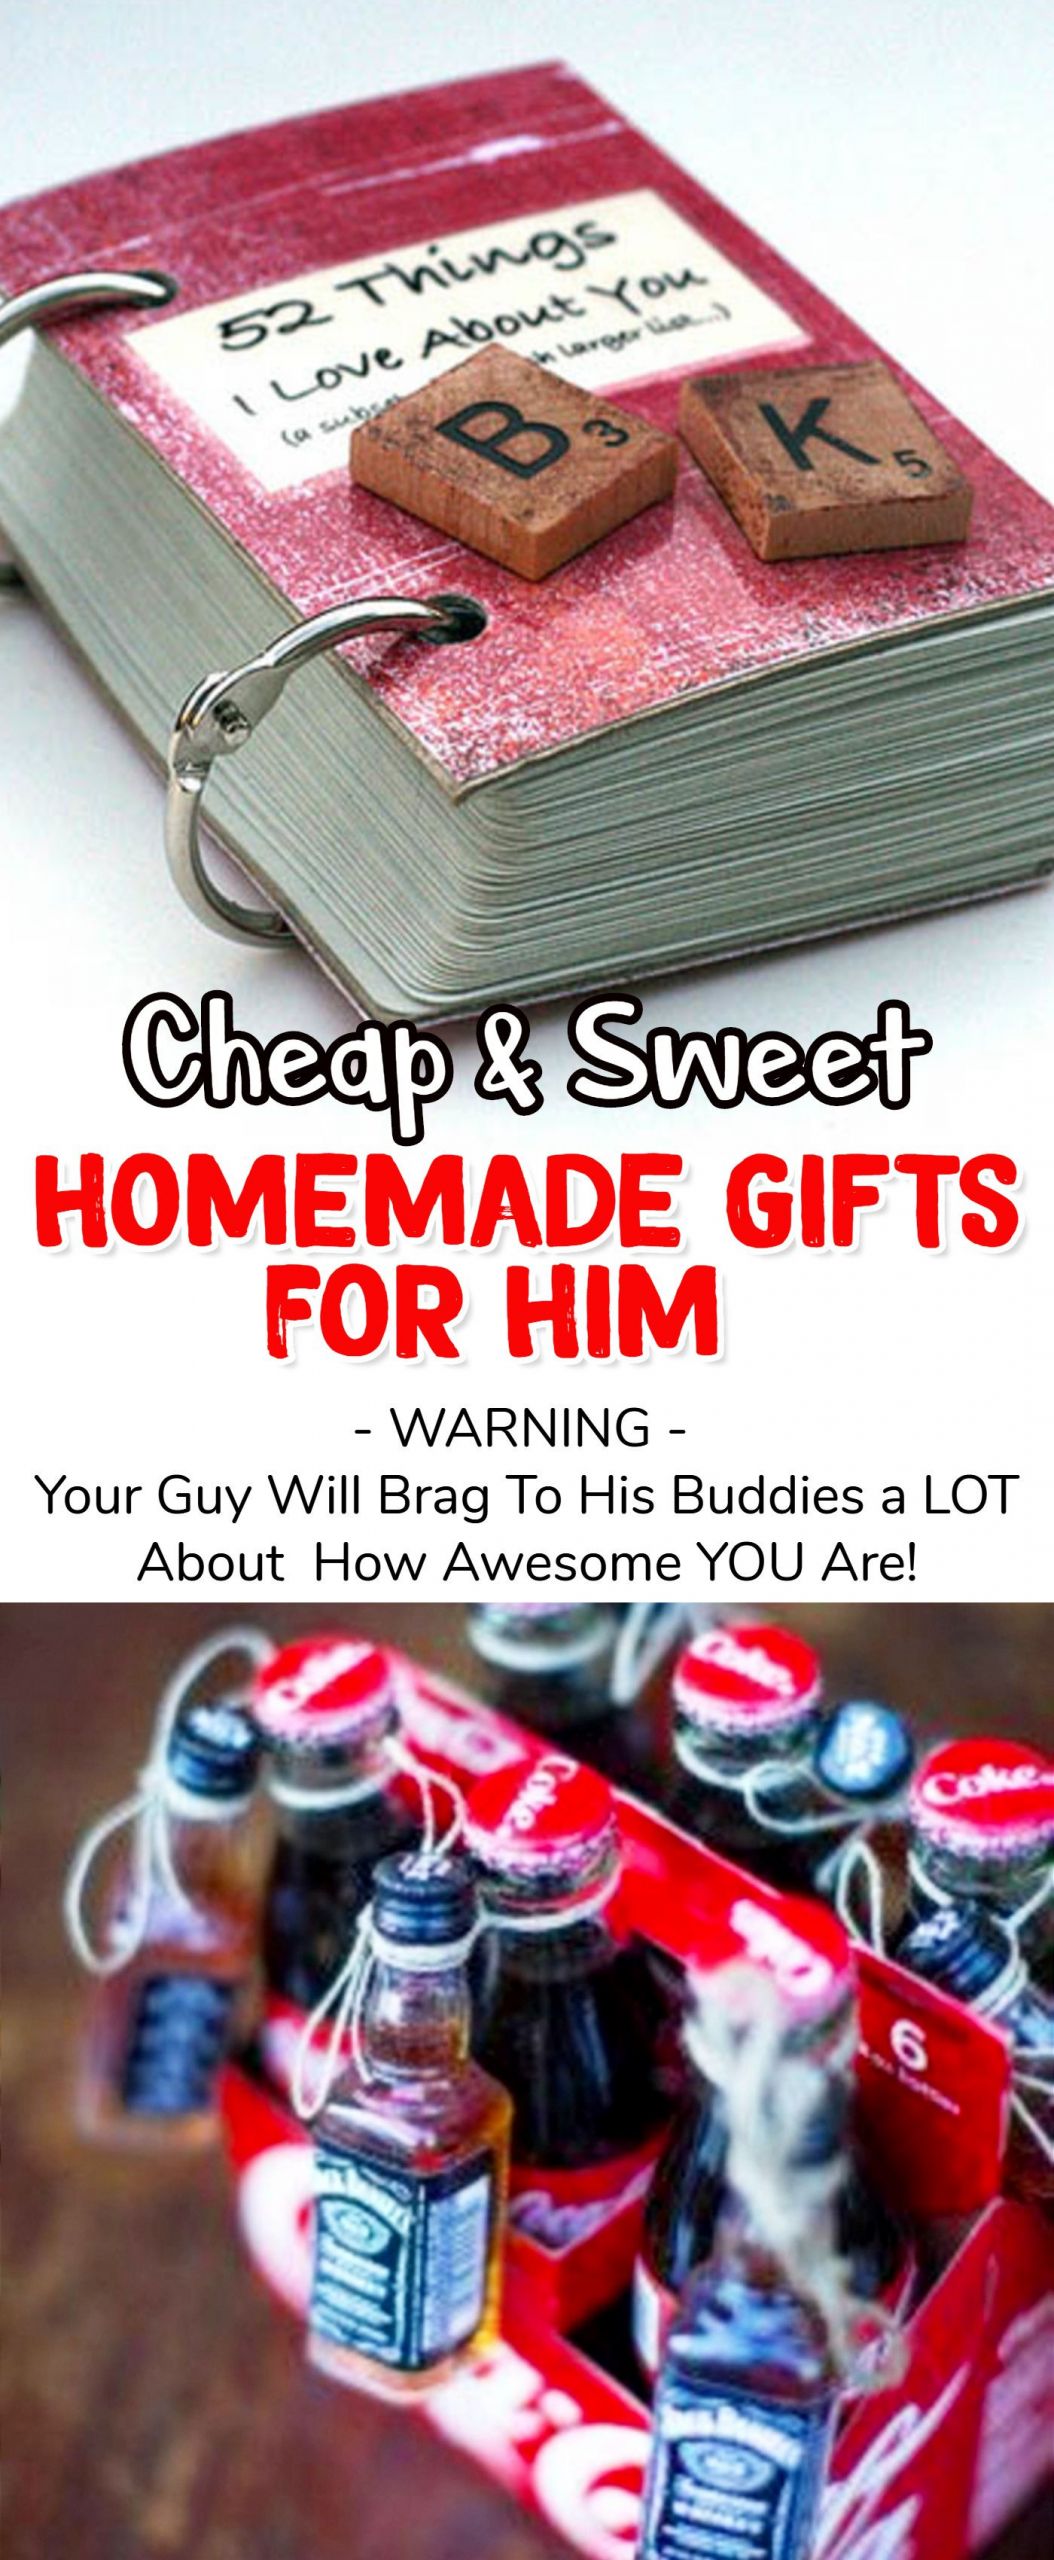 Boy Gift Ideas For Valentines
 Homemade Gift Ideas For Him 26 Romantic DIY Gifts To